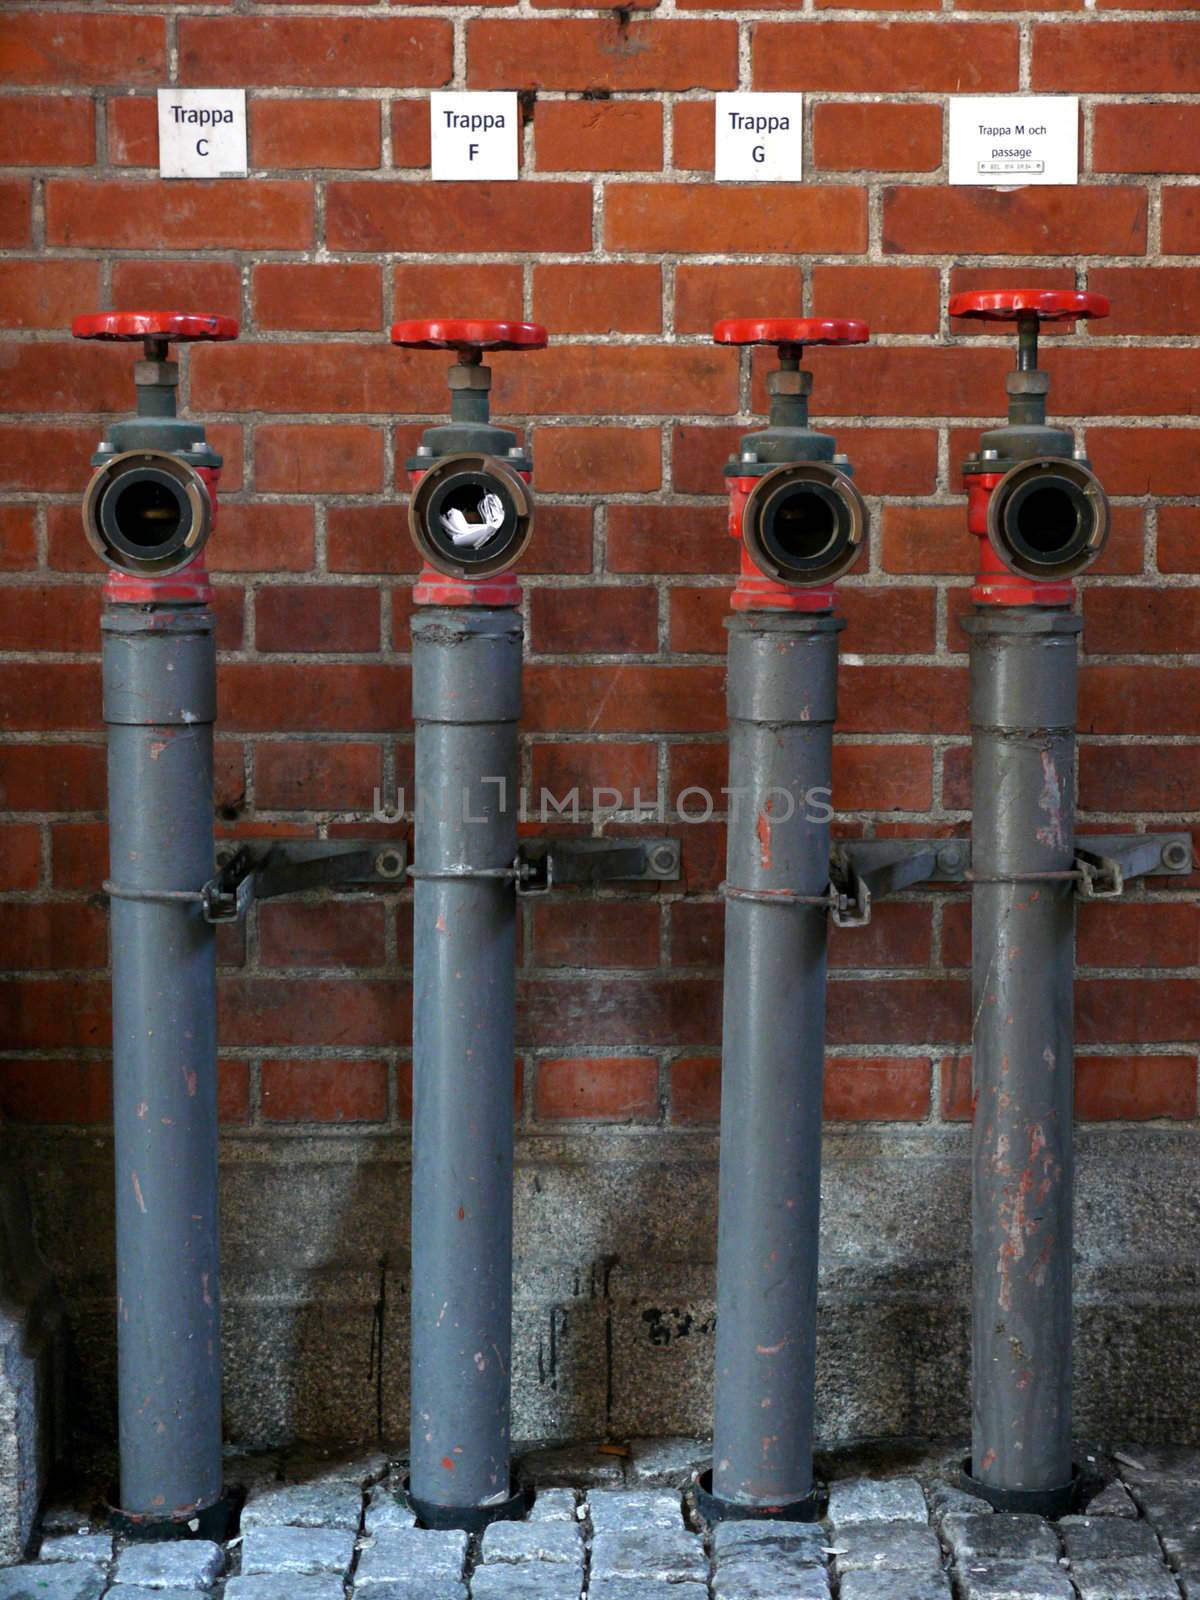 portrait of row of water pipes with a note